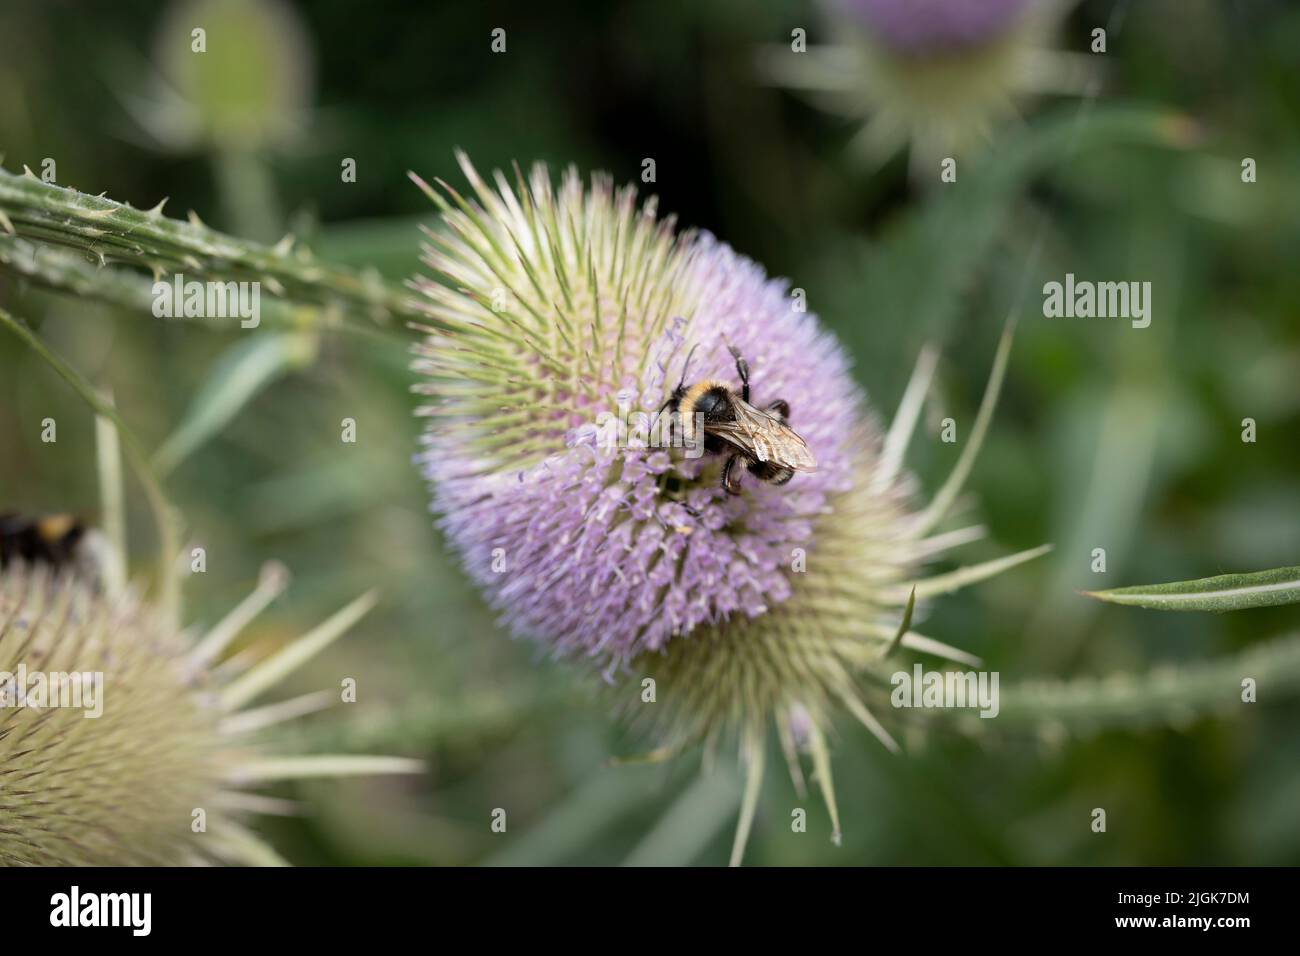 A bumble bee (bombus terrestris) gathers pollen on a flowering spear thistle (Cirsium lanceolatum) in a July south London garden, on 10th July 2022, in London, England. Stock Photo